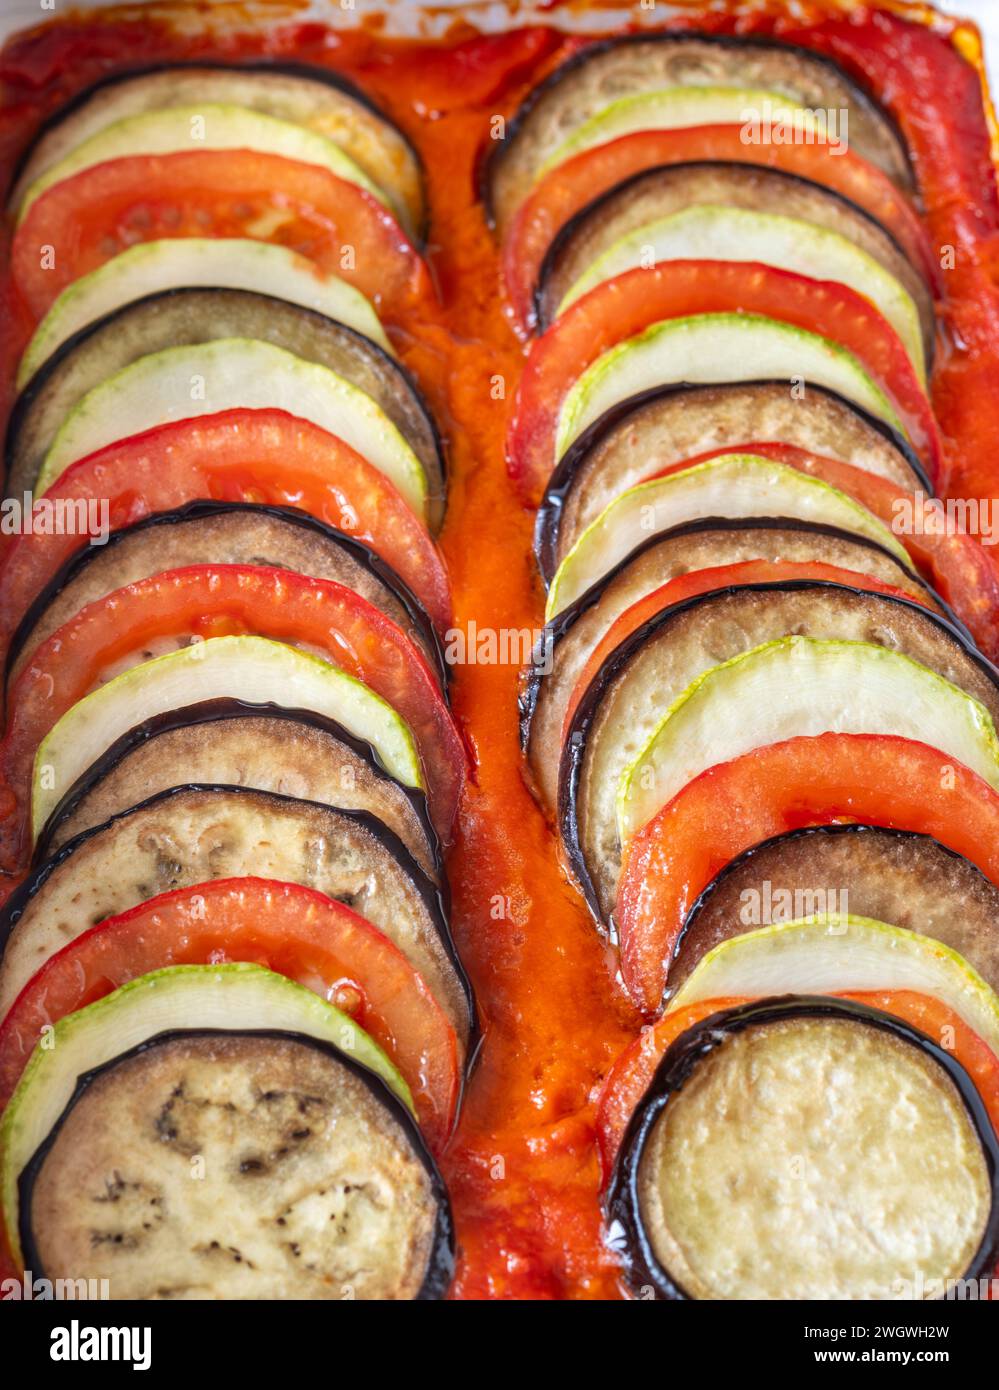 Ratatouille dish of stewed vegetables in baking dish Stock Photo